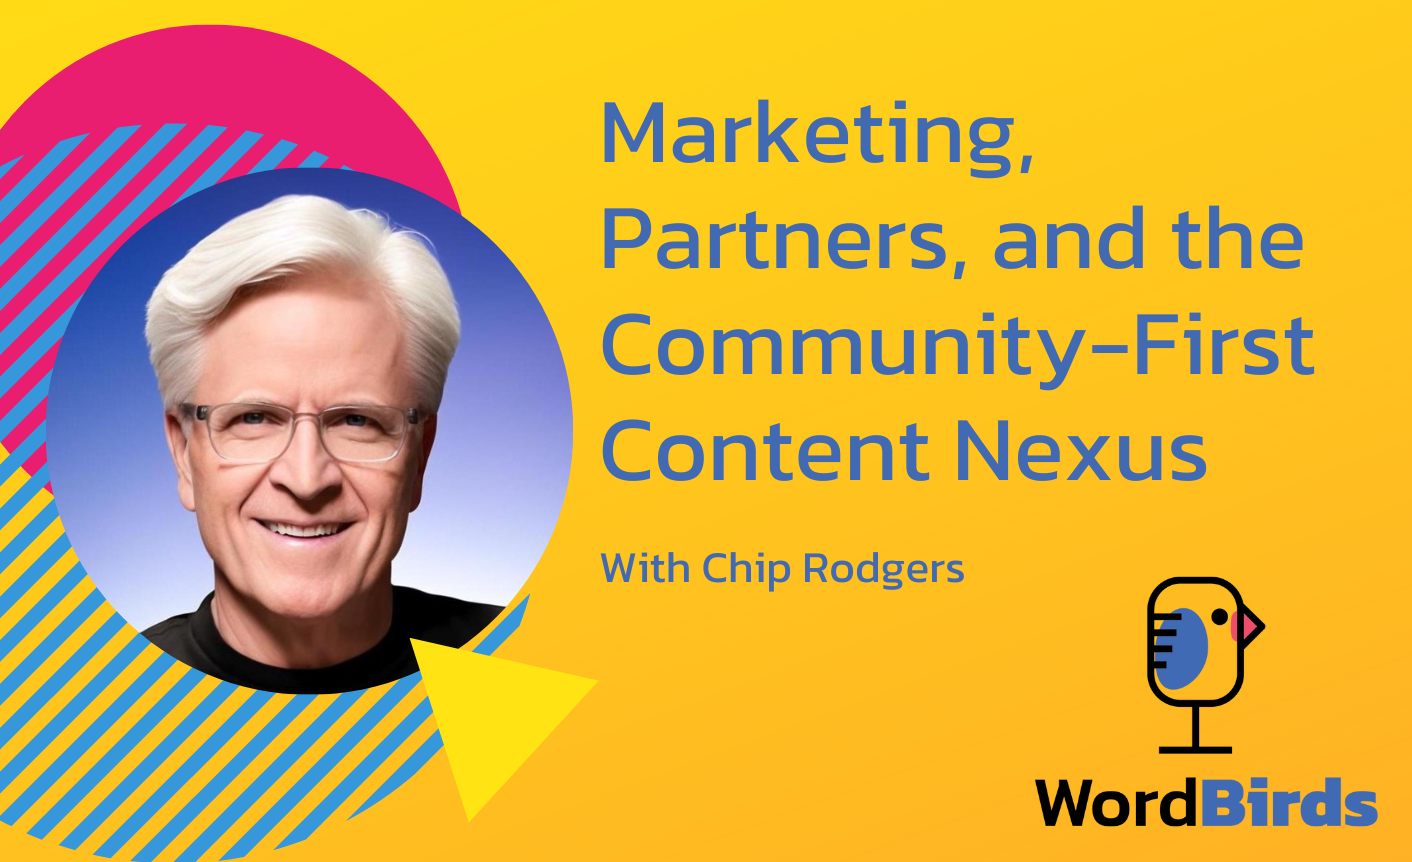 On a yellow background with a headshot of Chip Rodgers on the left, the title reads "Marketing, Partners, and the Community-First Content Nexus."